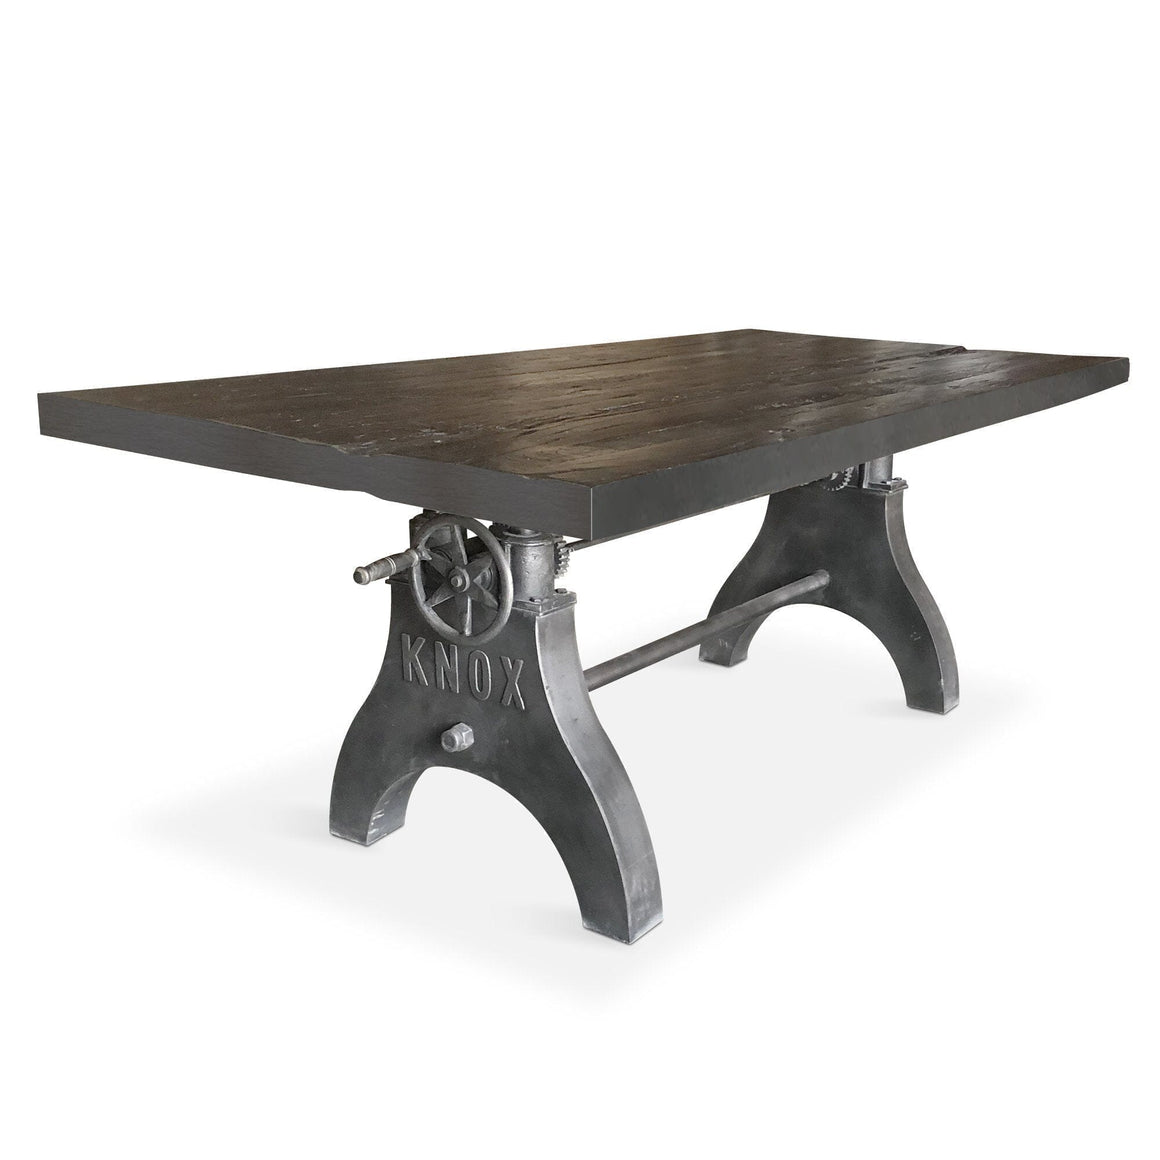 KNOX Adjustable Height Dining Table - Cast Iron Crank Base - Rustic Ebony - Rustic Deco Incorporated